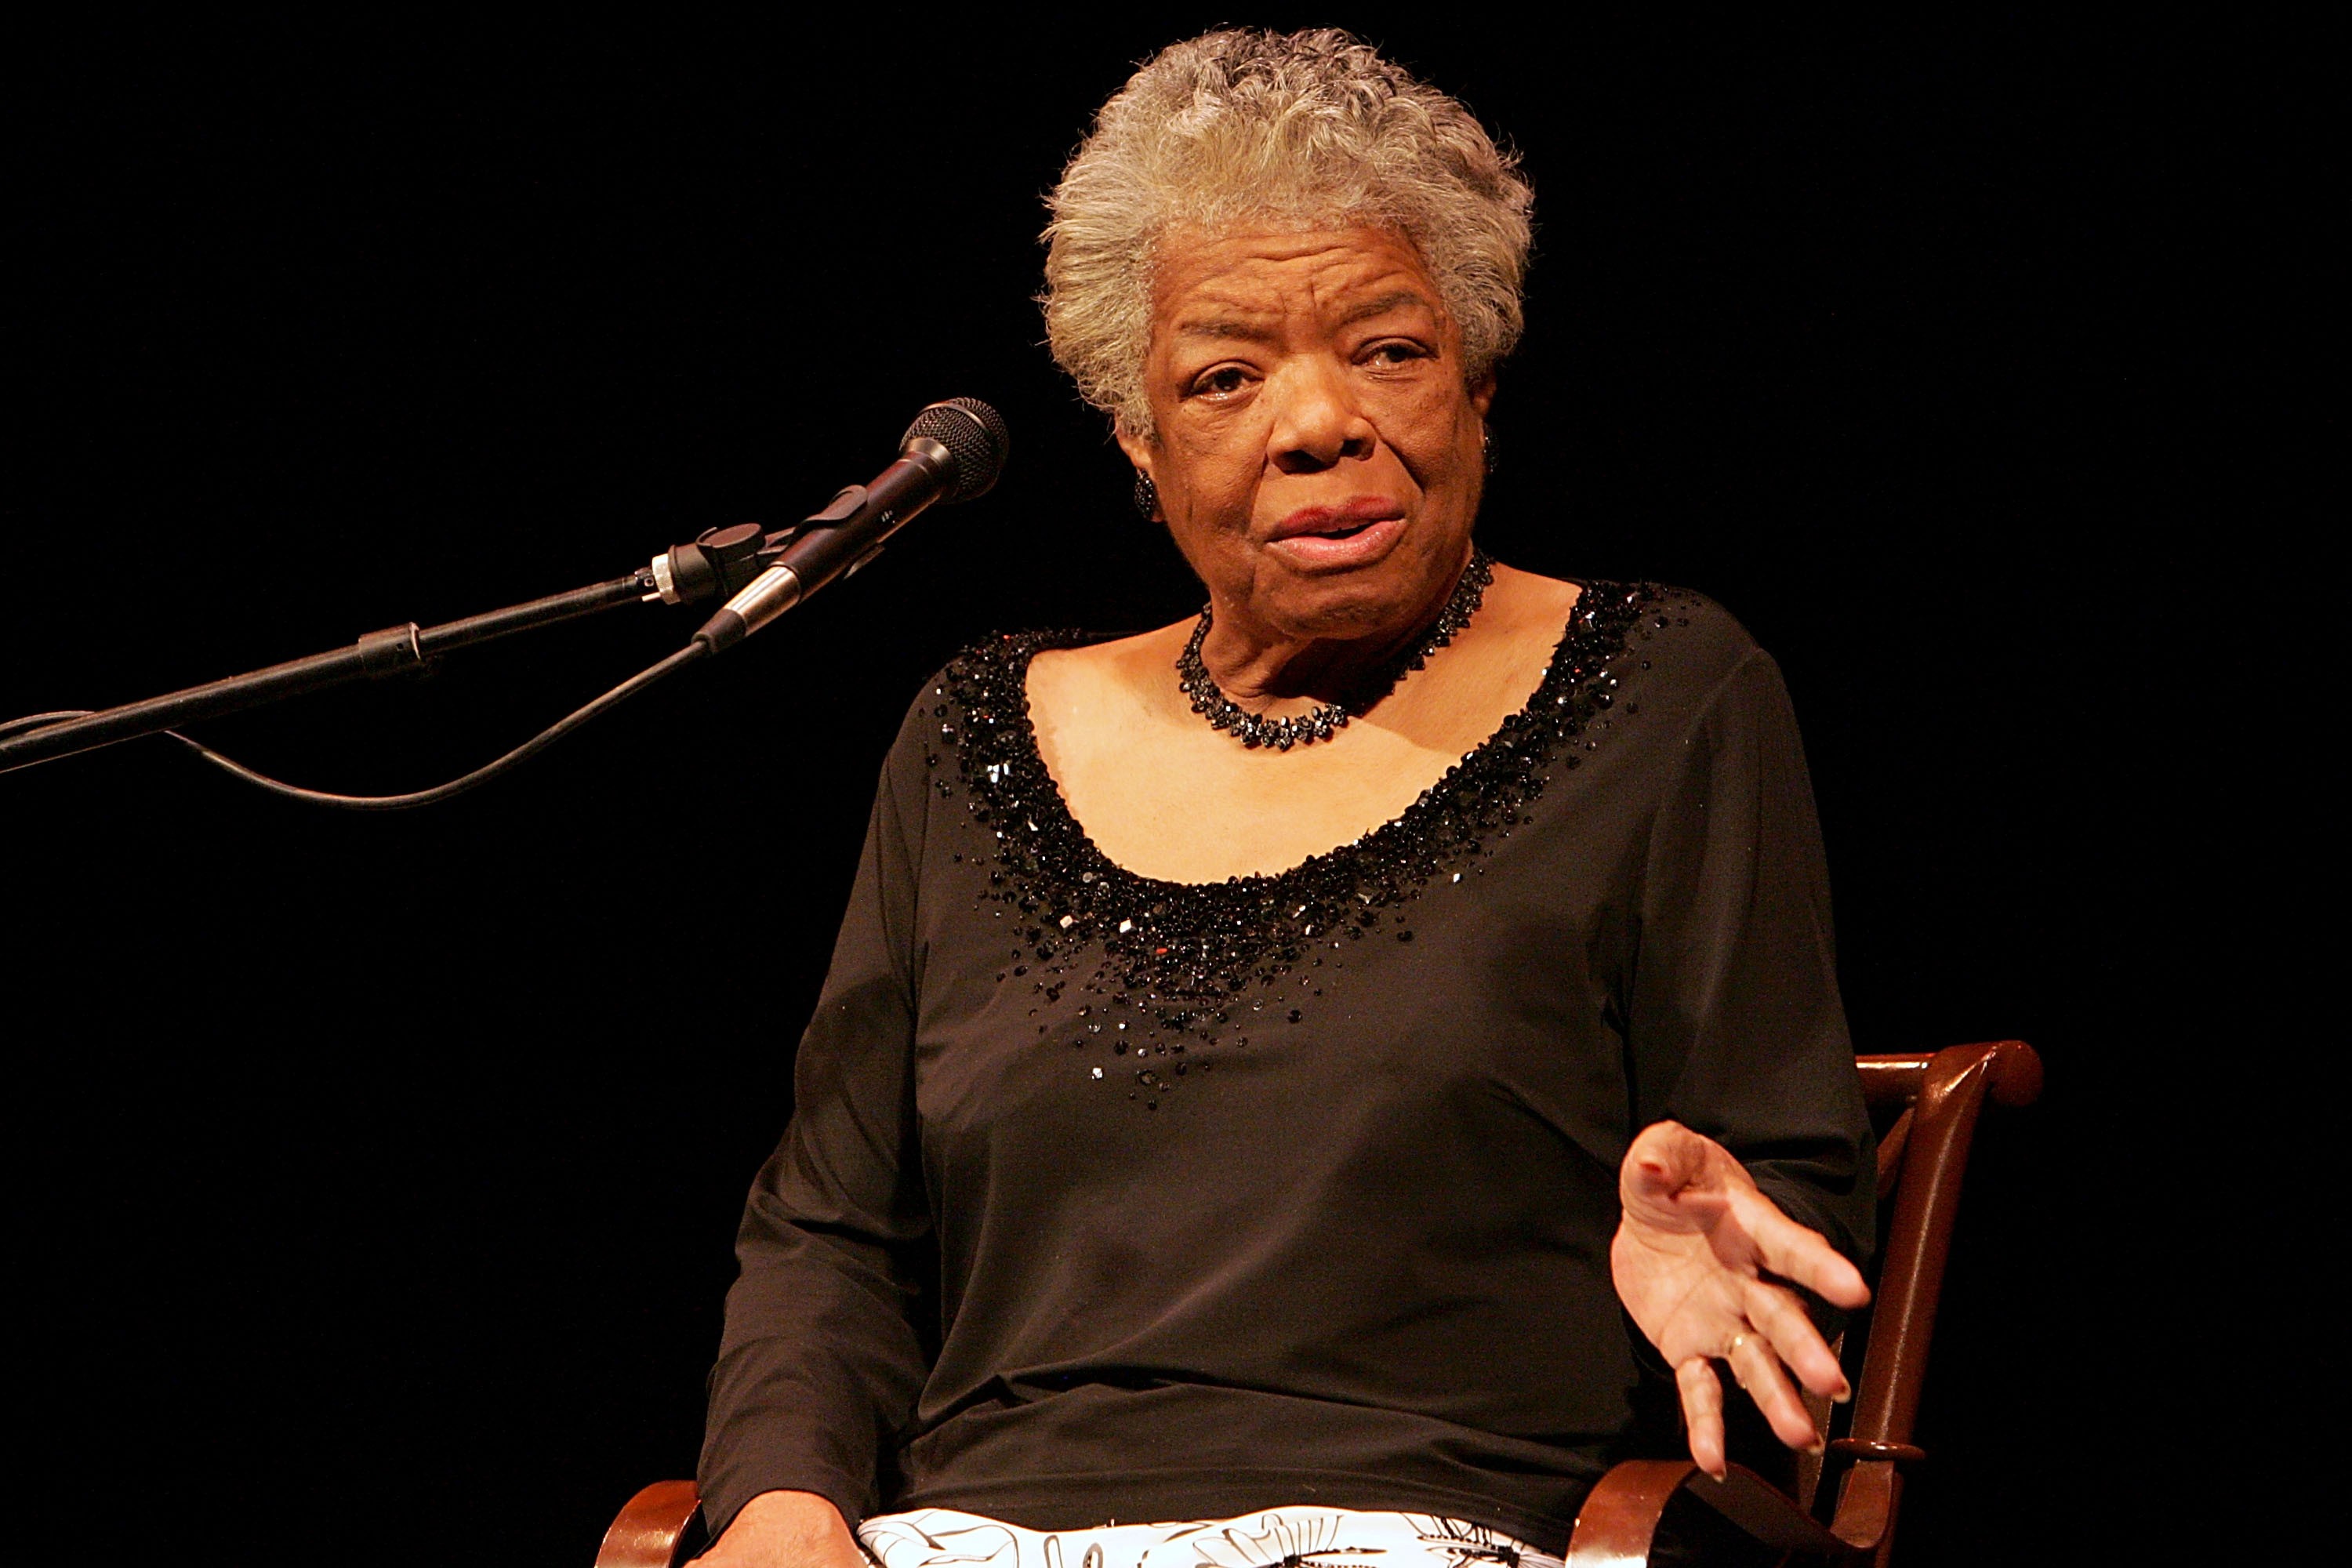 AUSTIN, TX - APRIL 25:  Dr. Maya Angelou speaks to a sold out crowd at the Paramount Theater on April 25, 2009 in Austin, Texas.  (Photo by Gary Miller/FilmMagic) (Foto: FilmMagic)